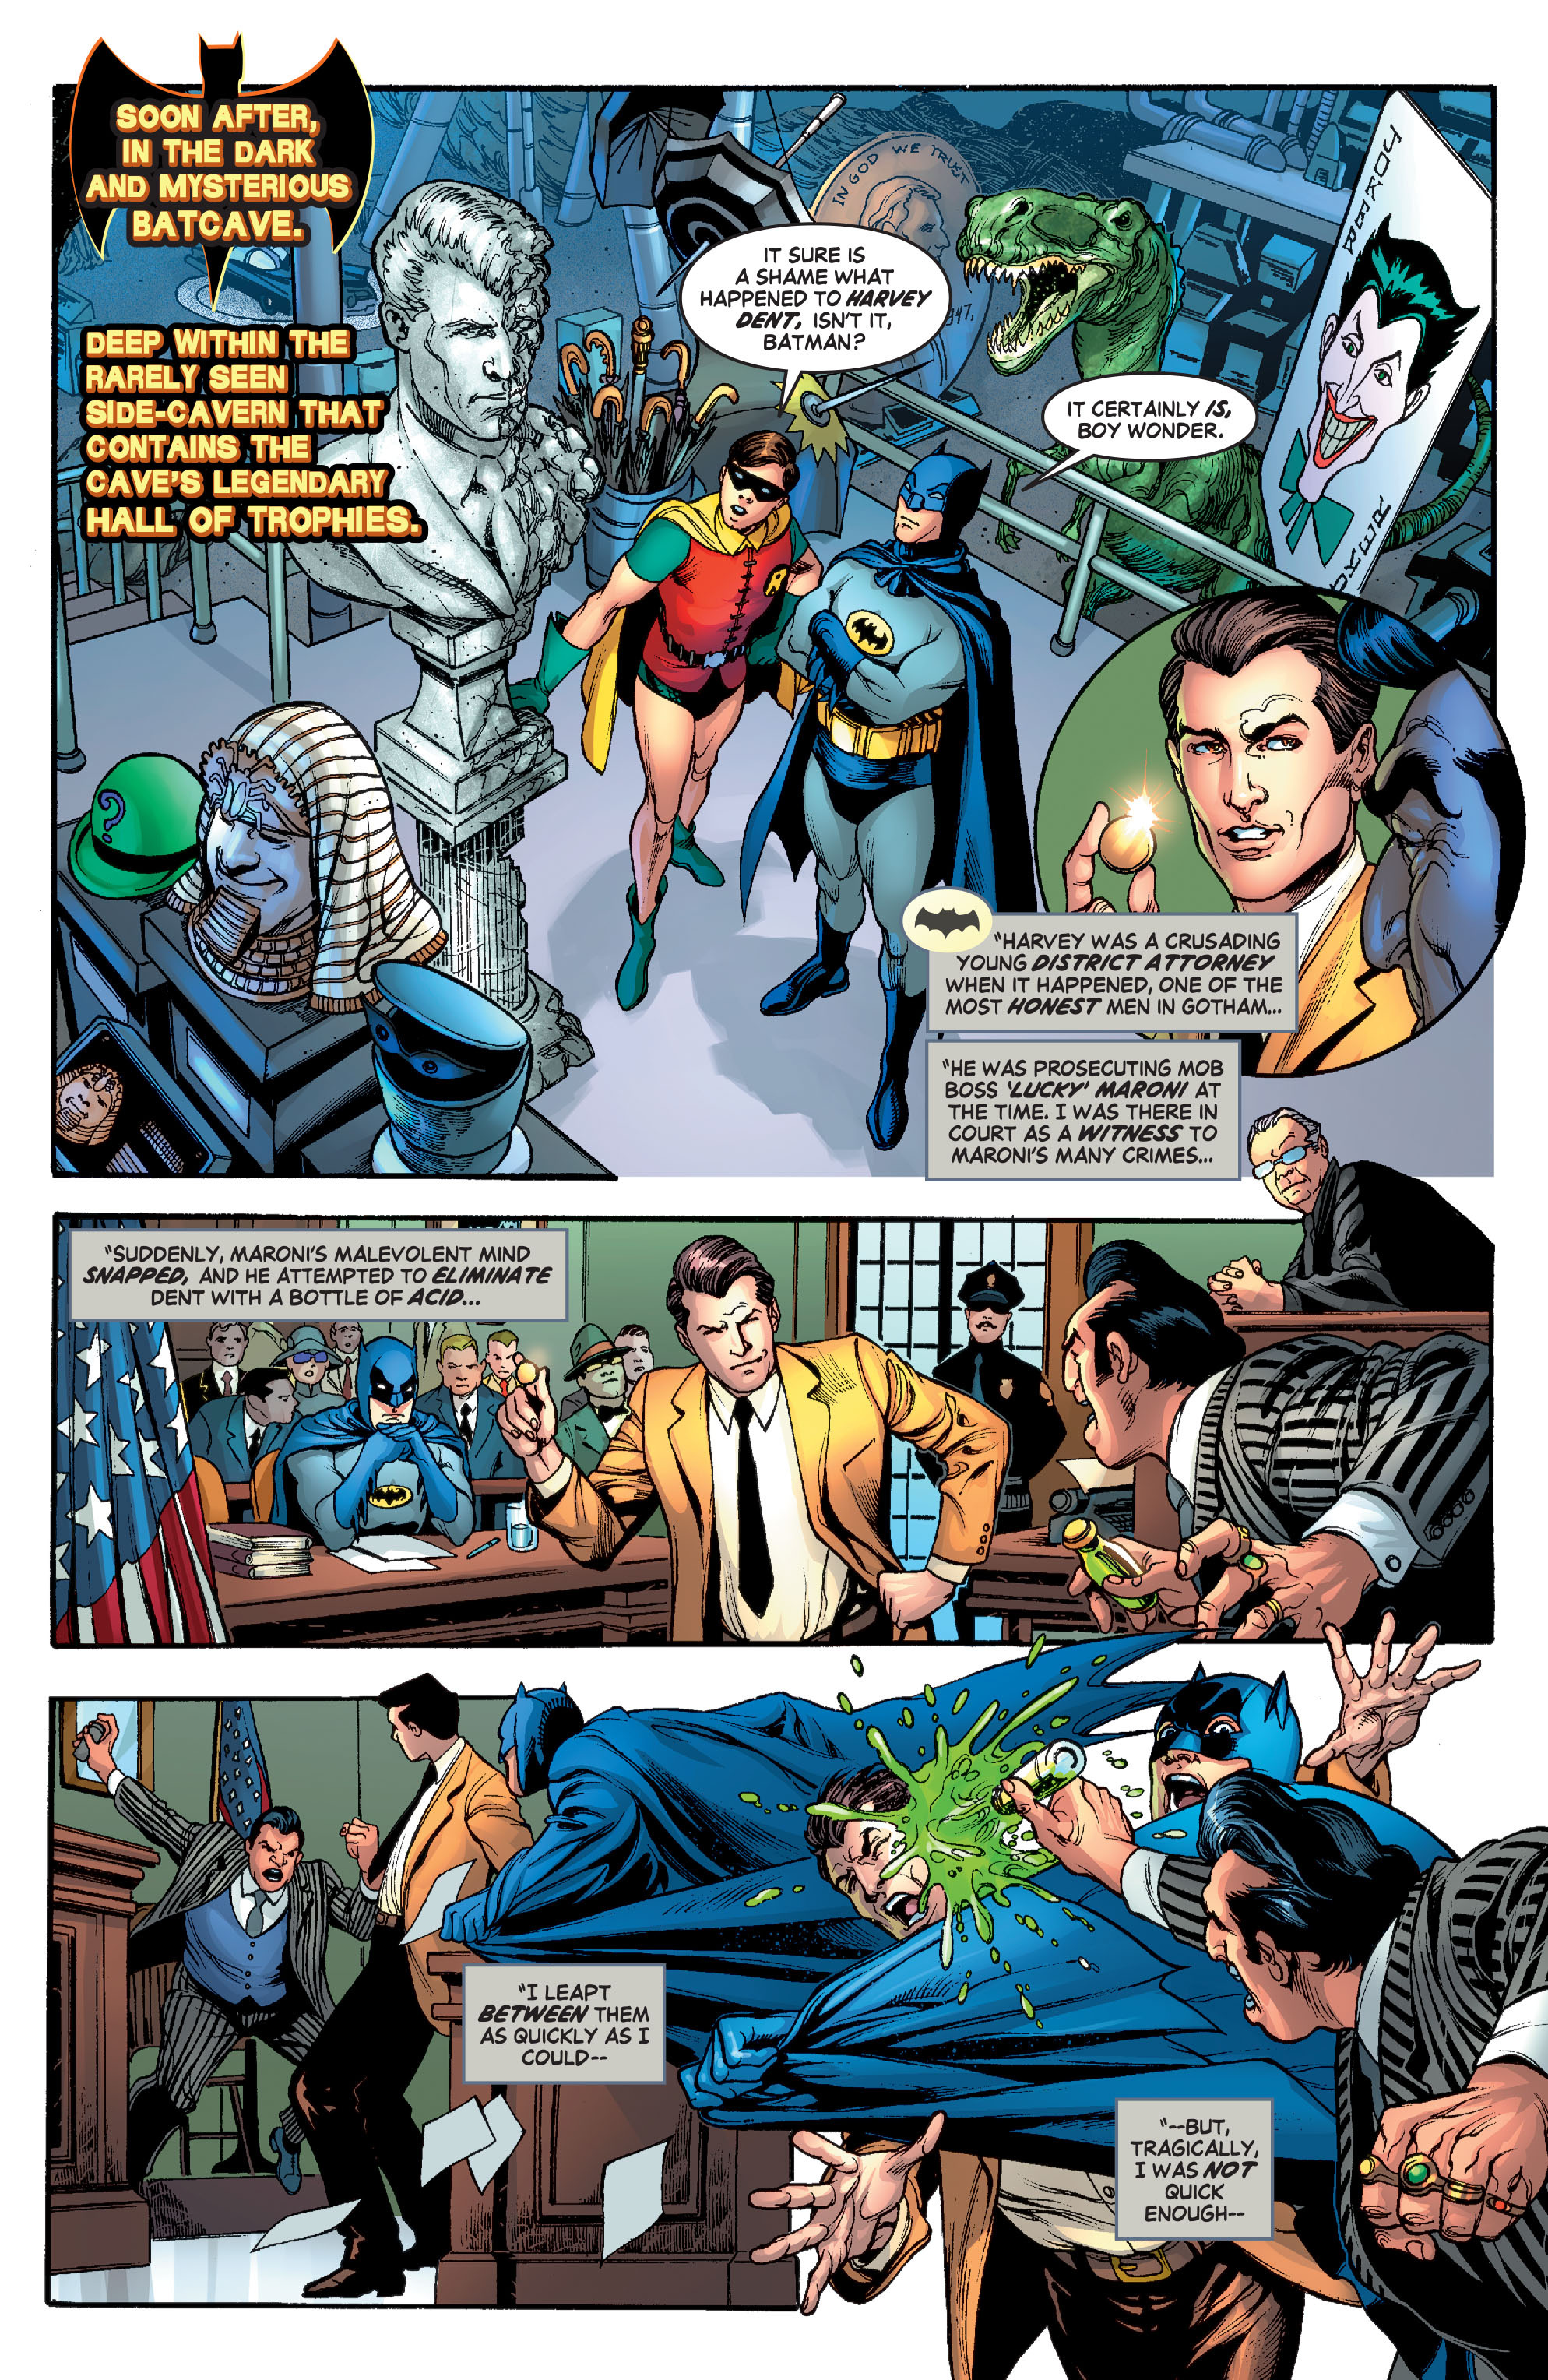 Batman 66 The Lost Episode Full | Read Batman 66 The Lost Episode Full  comic online in high quality. Read Full Comic online for free - Read comics  online in high quality .|